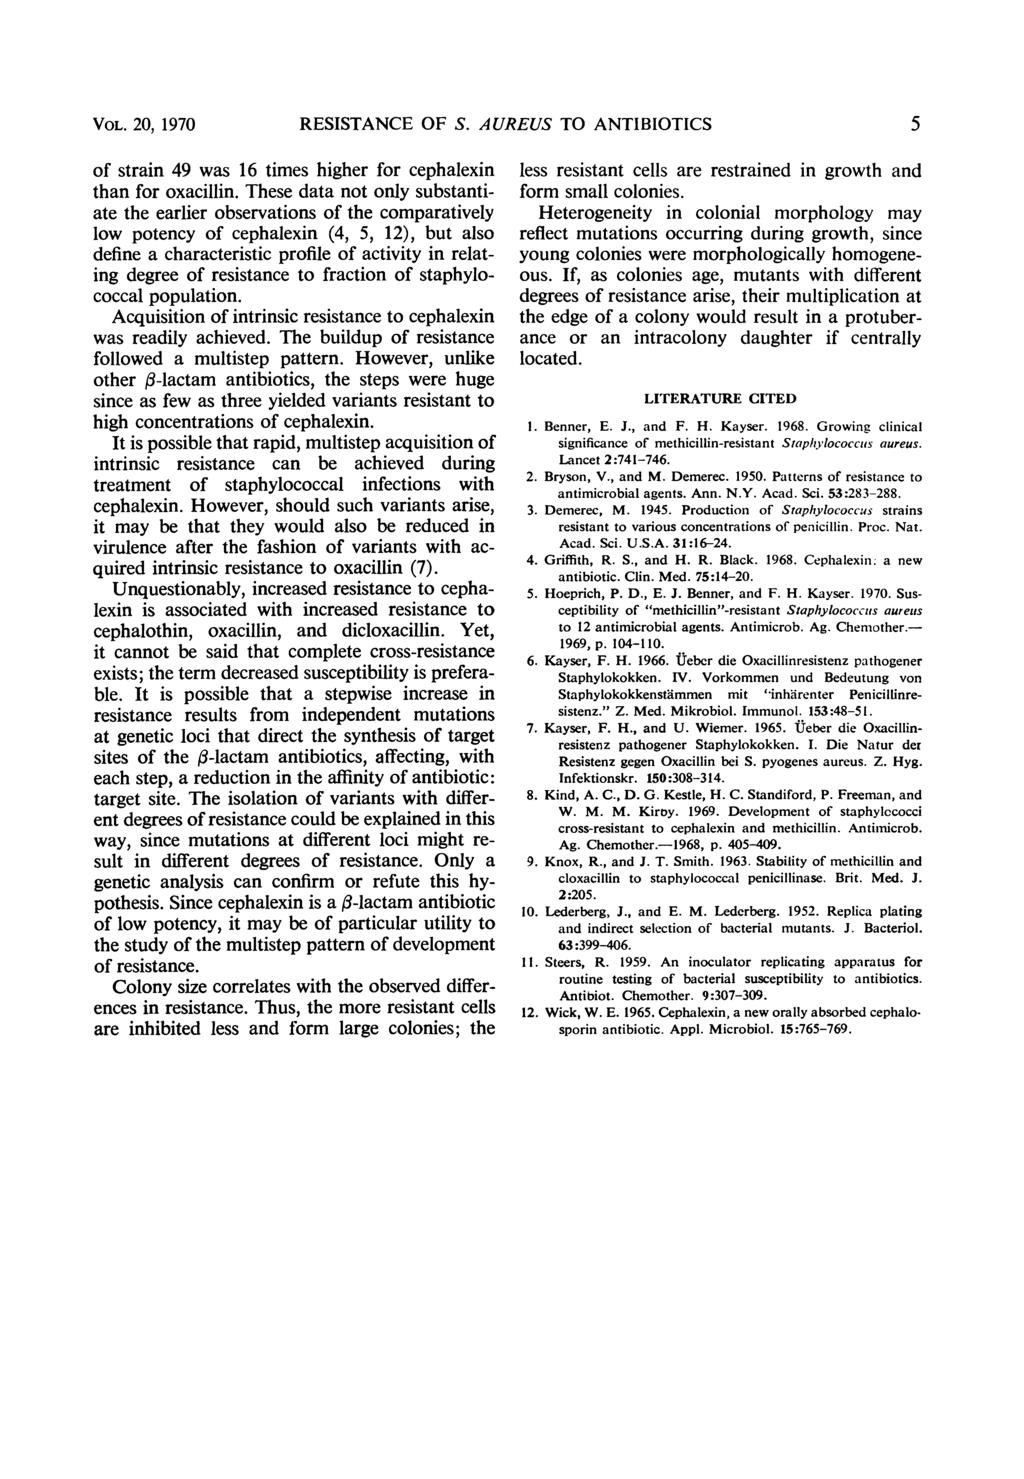 VOL. 20, 1970 RESSTANCE OF S. AUREUS TO ANTBOTCS of strain 49 was 16 times higher for cephalexin than for oxacillin.